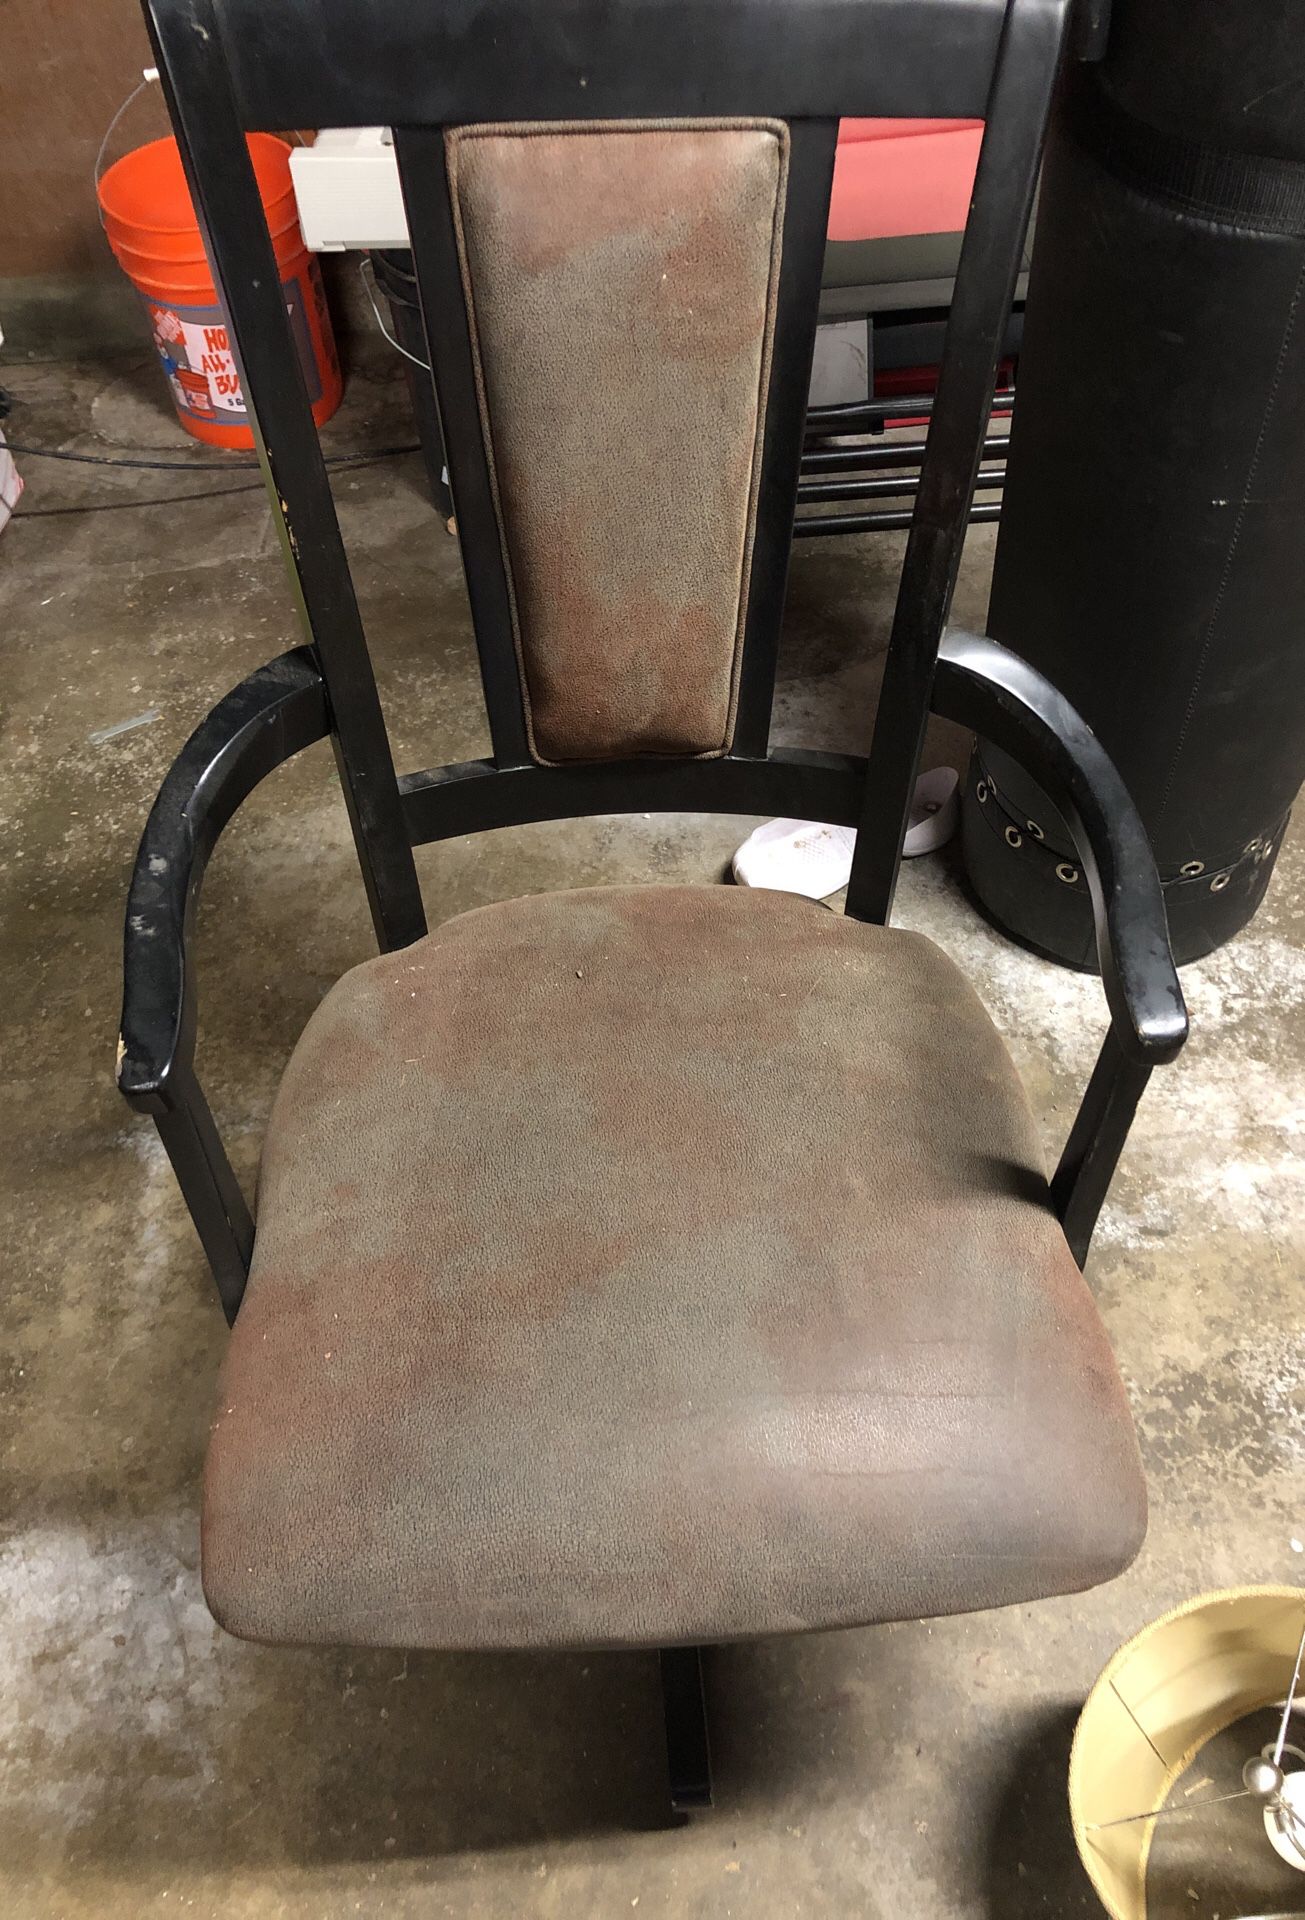 Free Office chair. Needs a touch up and missing a wheel.